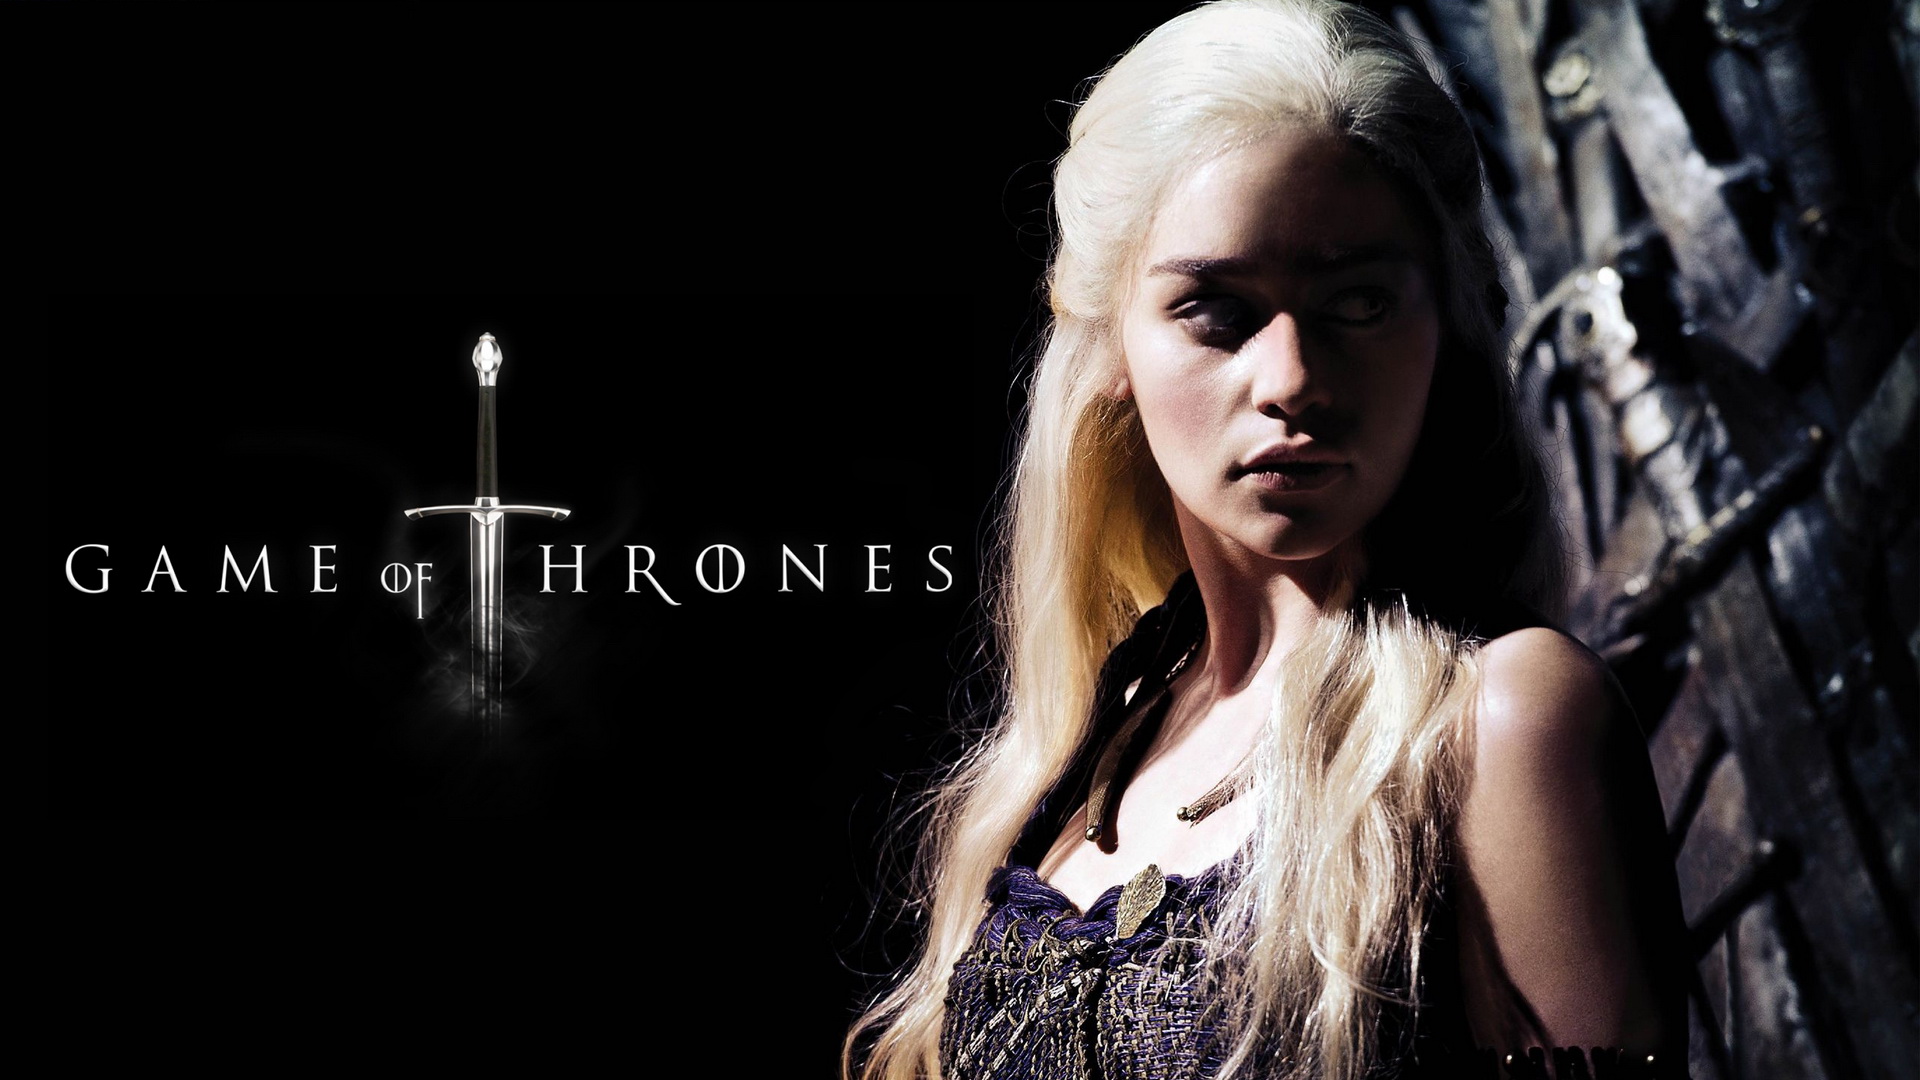 Game Of Thrones Wallpaper: HD Game of Thrones Wallpapers Free